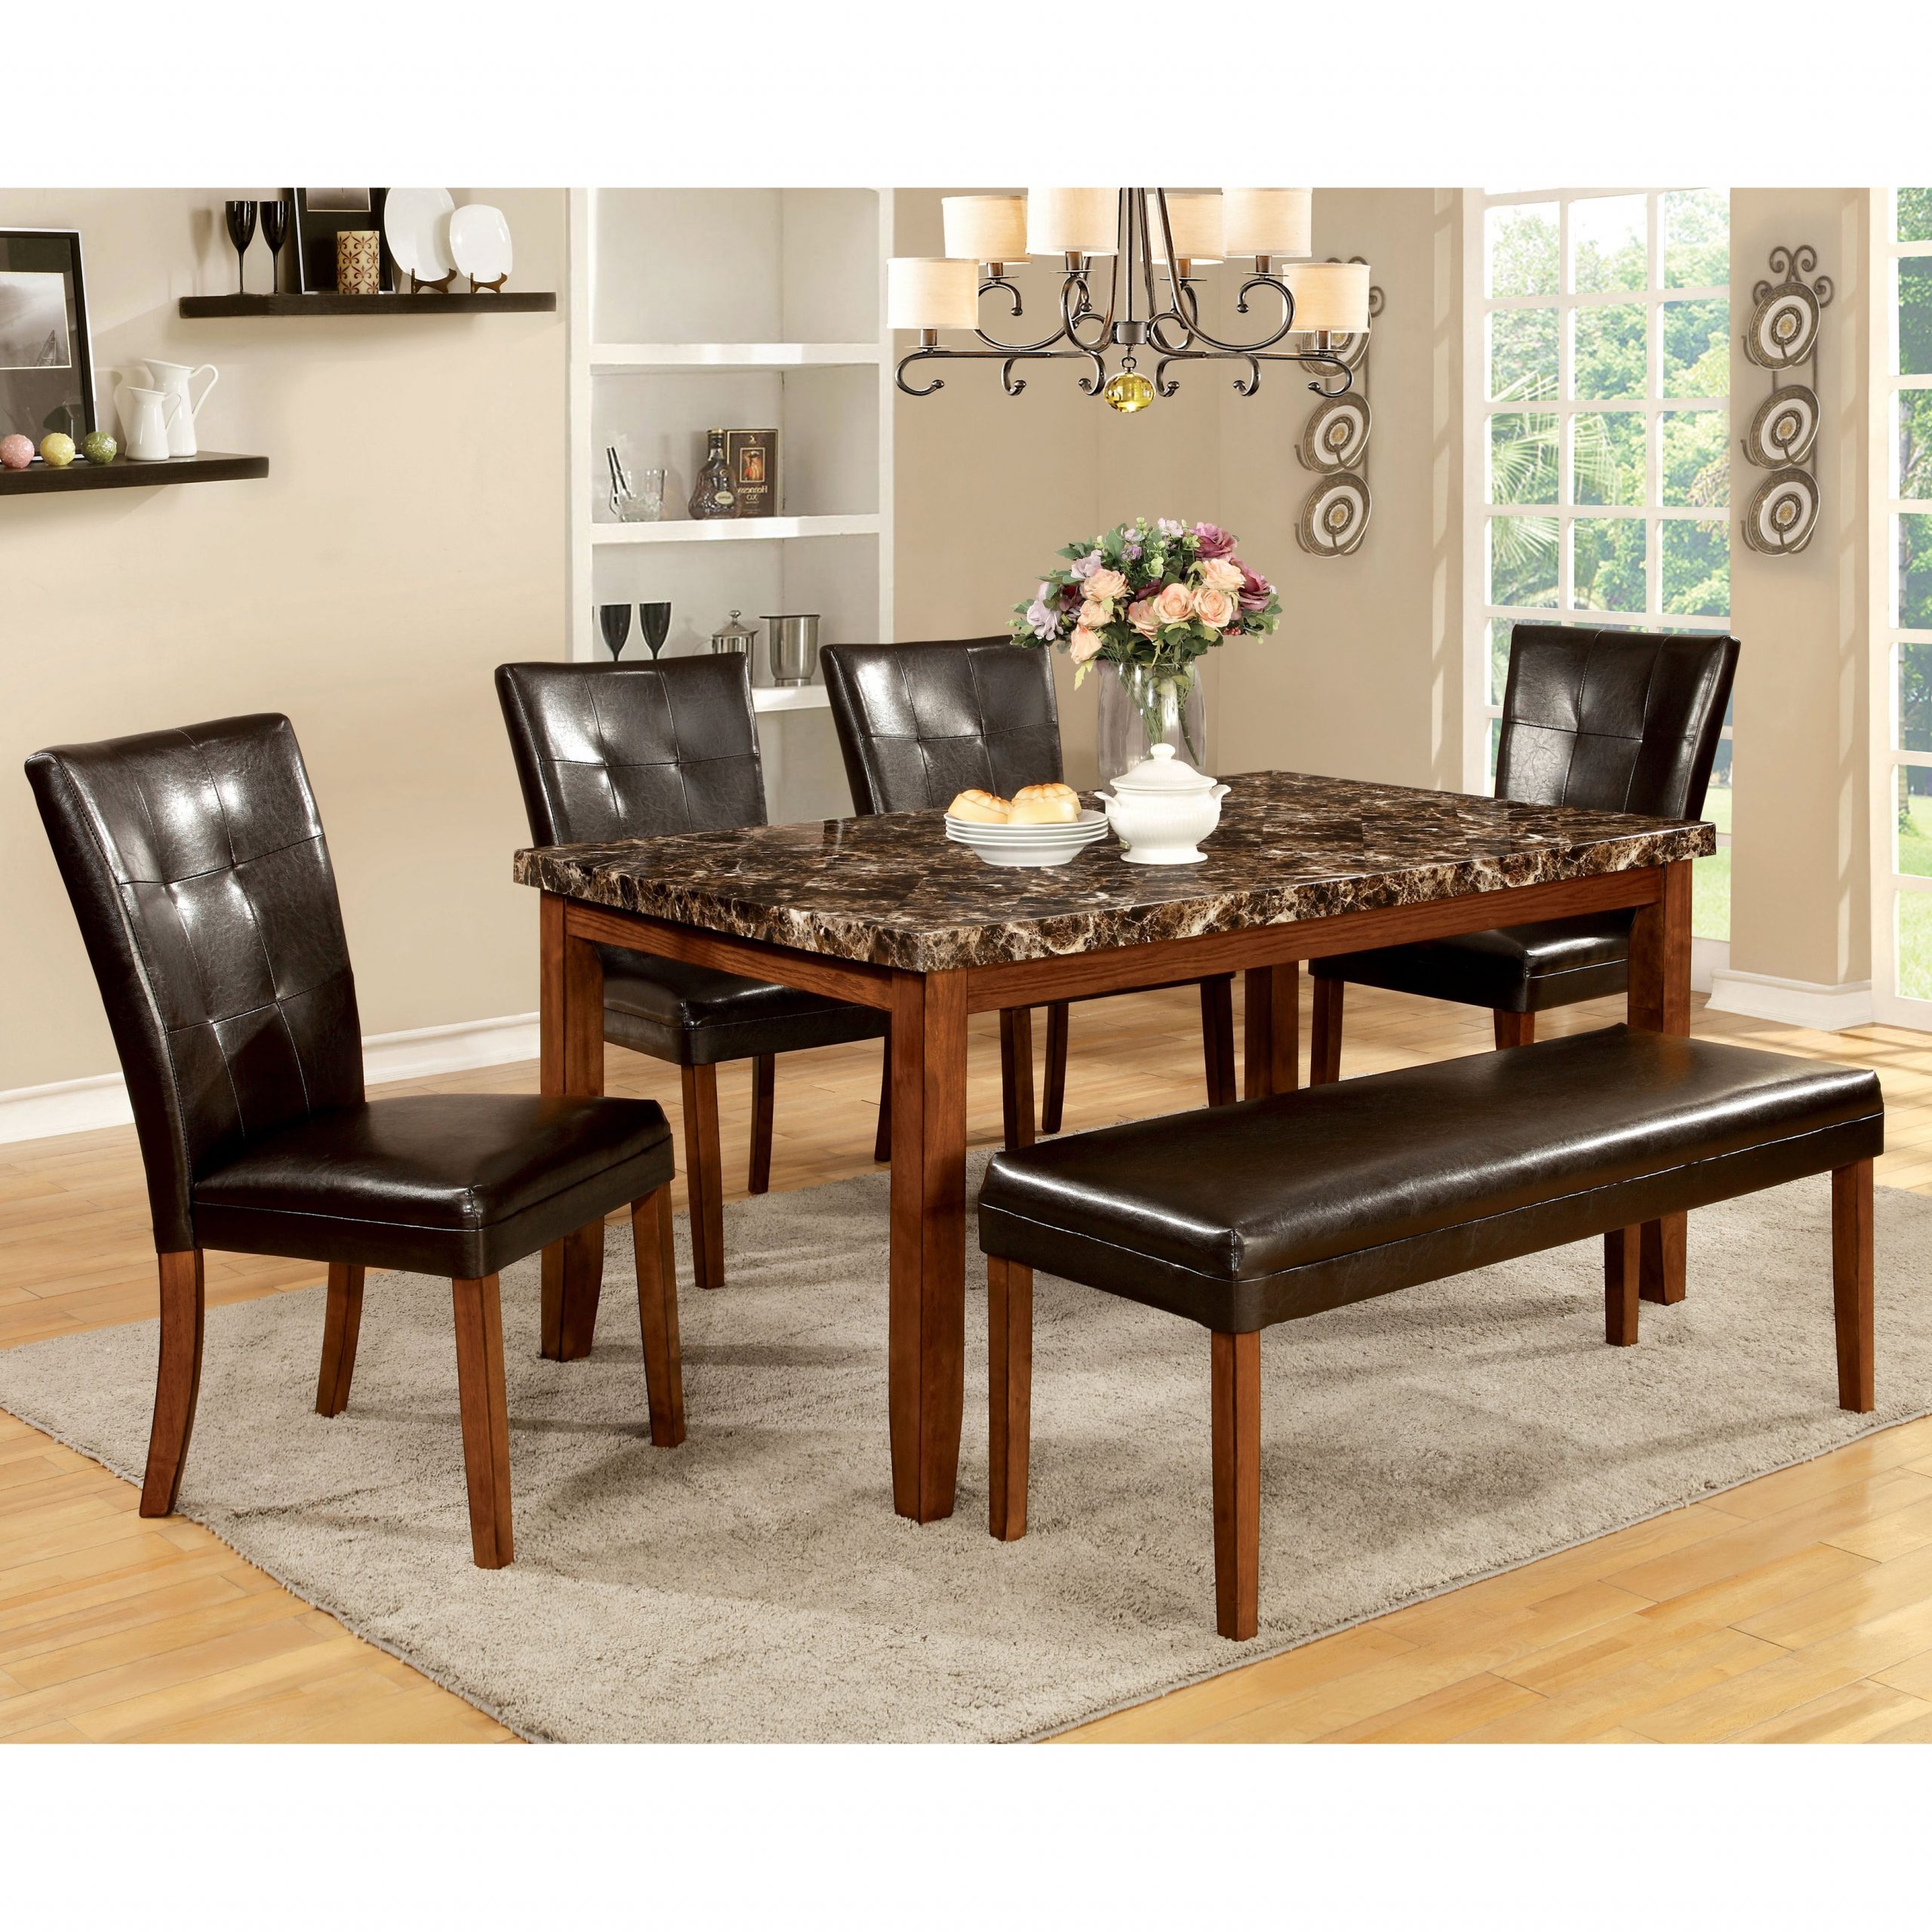 Furniture Of America Yols Contemporary Oak 60 Inch Dining Table with sizing 3500 X 3500